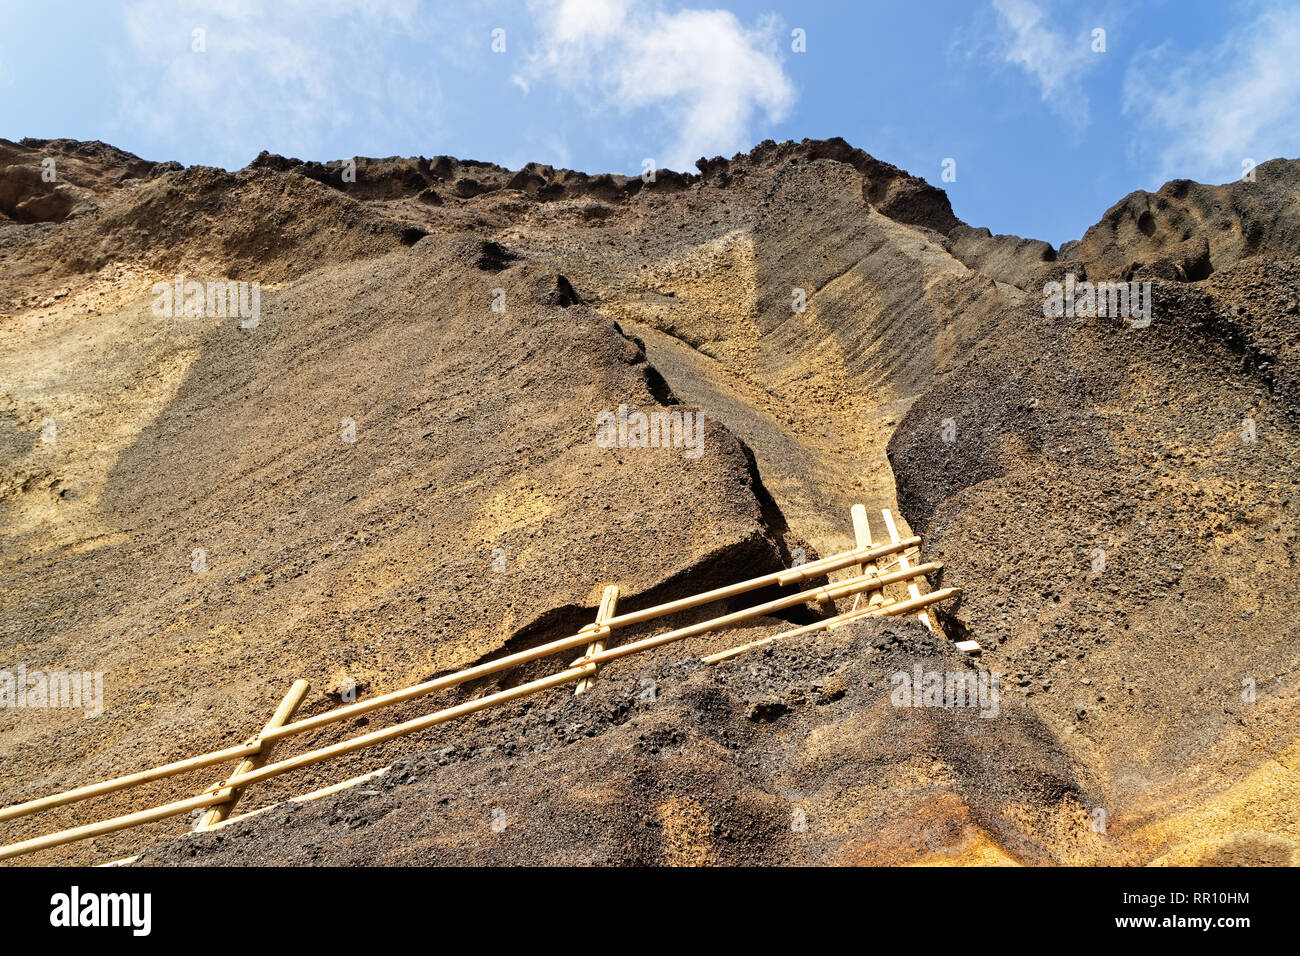 View from below on a steep cliff face in yellow tones, through which leads a climbing path attached with a wooden railing, traces of erosion, over it  Stock Photo